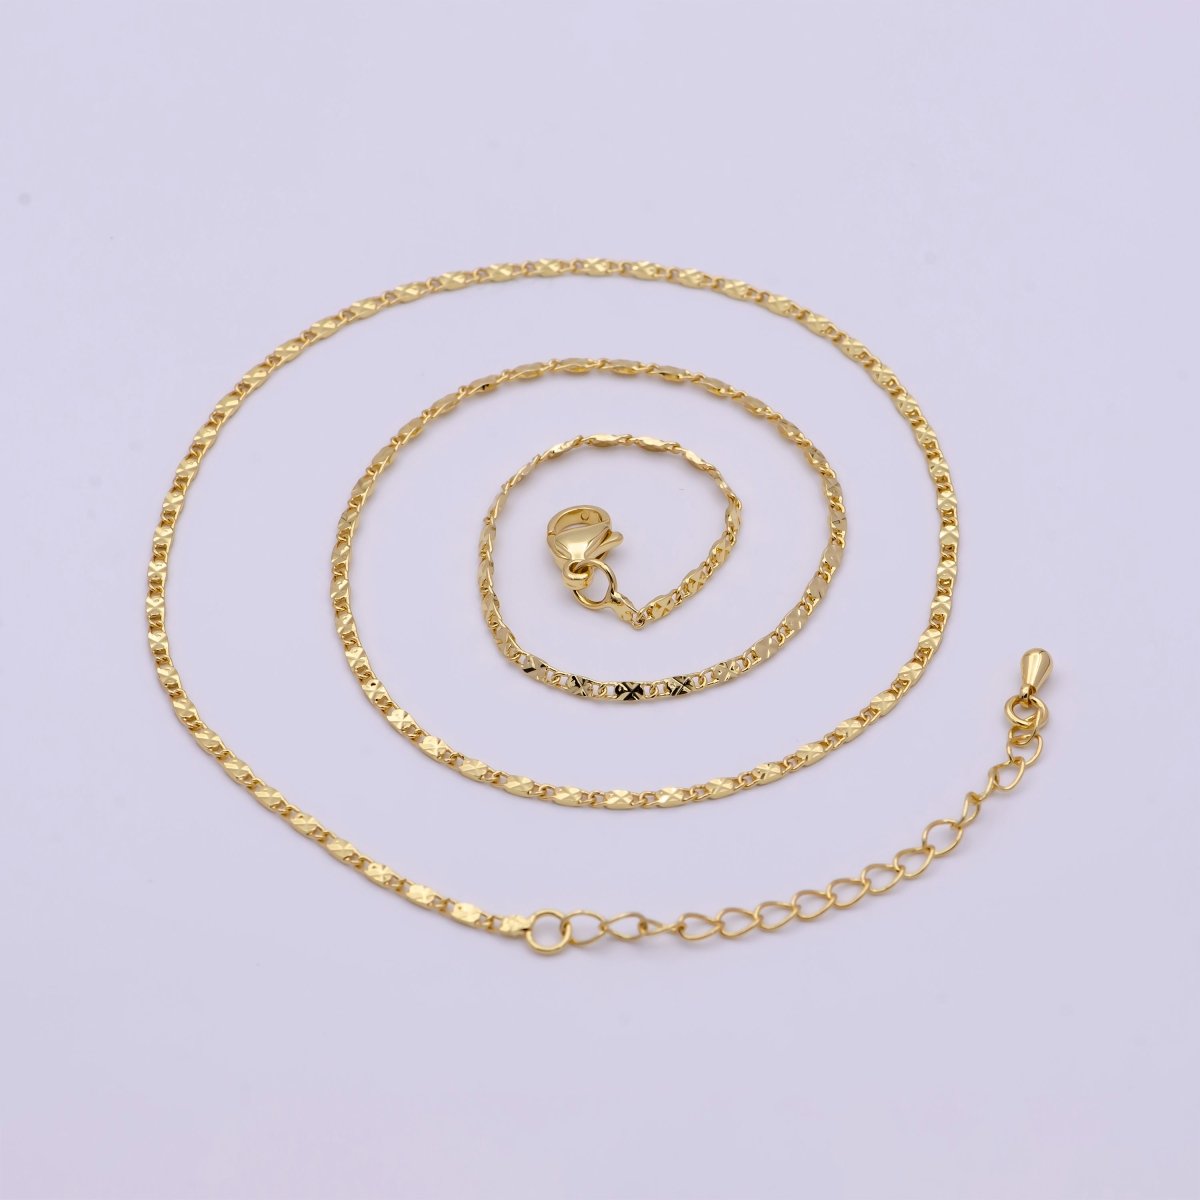 24K Gold Filled Link Sunburst Scroll Unique Chain 18 Inch Necklace with 2" Extender For Jewelry Making | WA-1090 Clearance Pricing - DLUXCA